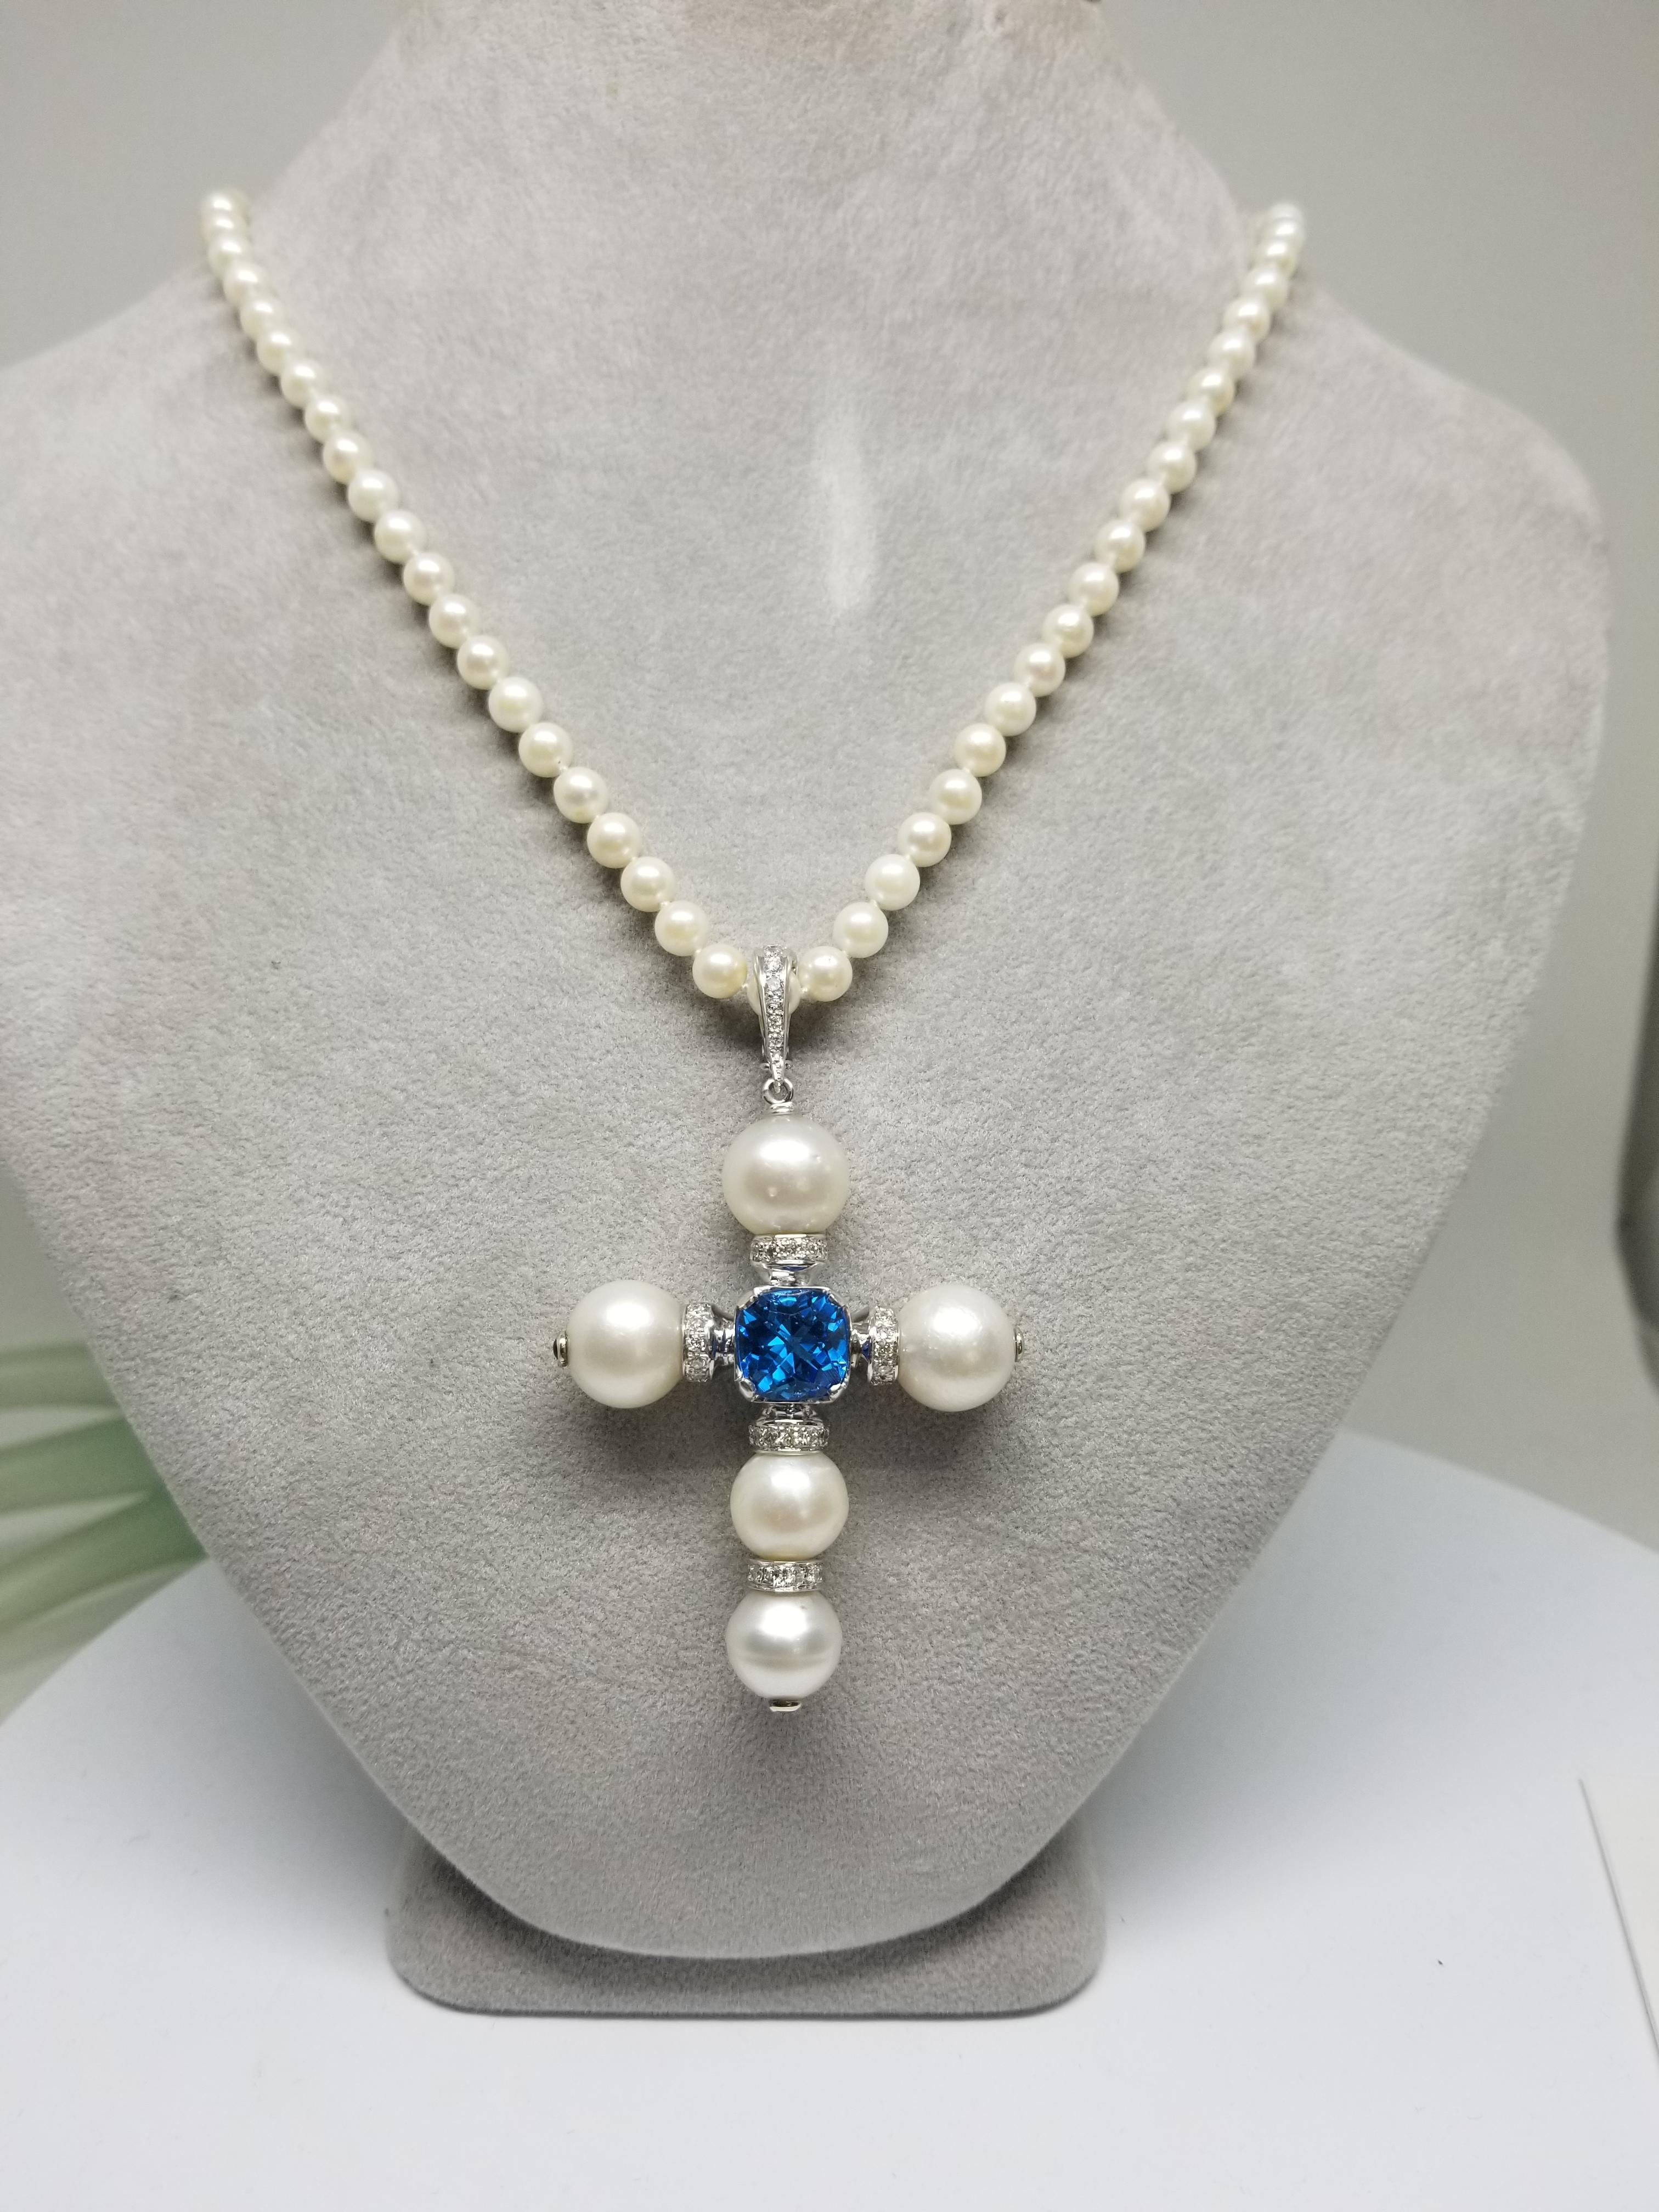 14k white gold South Sea Pearl cross with 5 pearls measuring 10.5-12mm, with a cushion cut swiss blue topaz weighing 5.03cts., 25 round full cut diamonds weighing .53pts. and 3 round sapphires as accents on the ends of the pearls set in a bezel. 